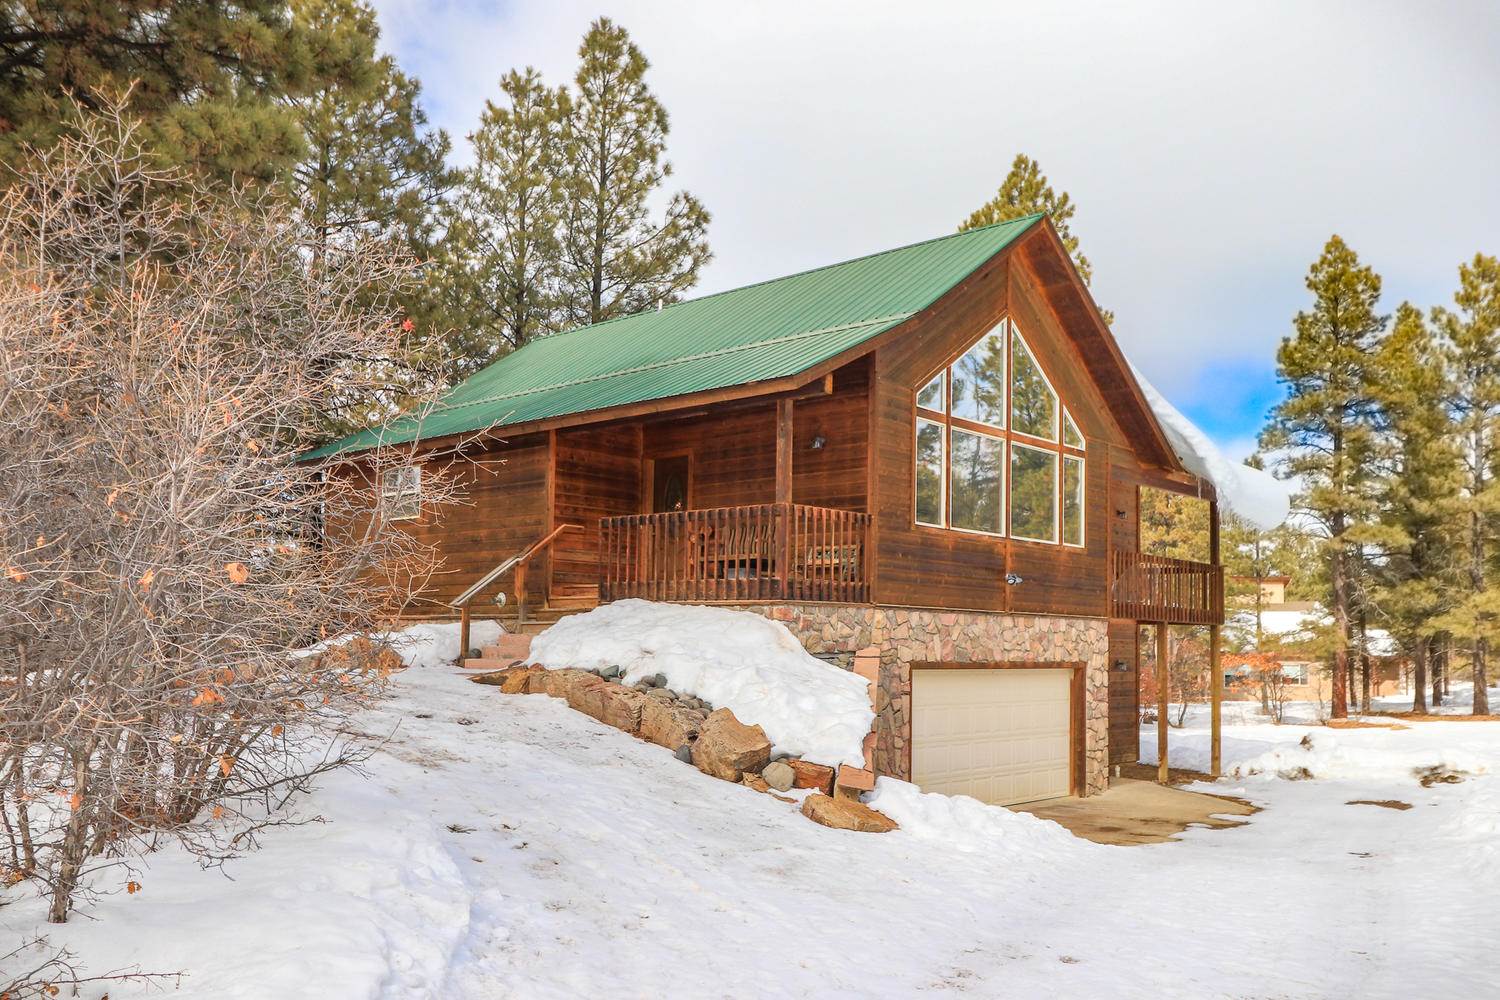 Olive Chateau, #49 Olive Ct. - ST, Pagosa Springs, CO 81147